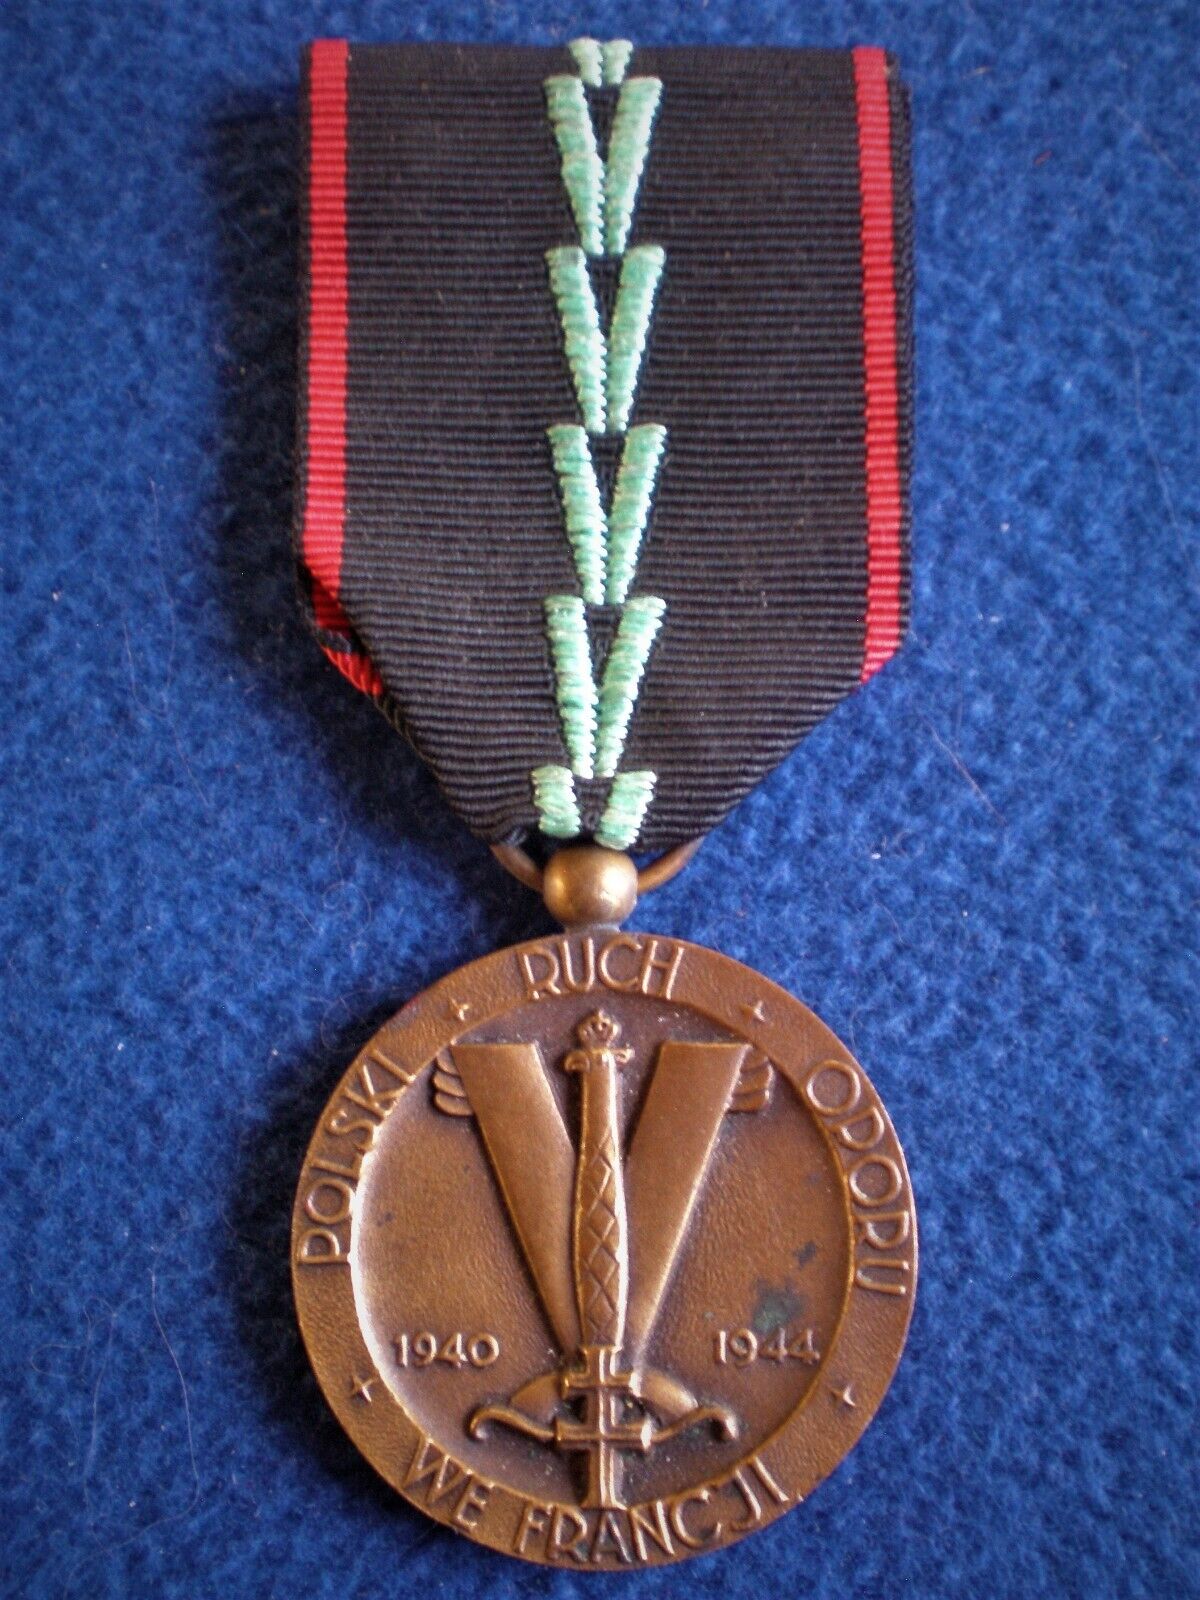 Poland: Medal for the Polish Resistance in France 1940-1944